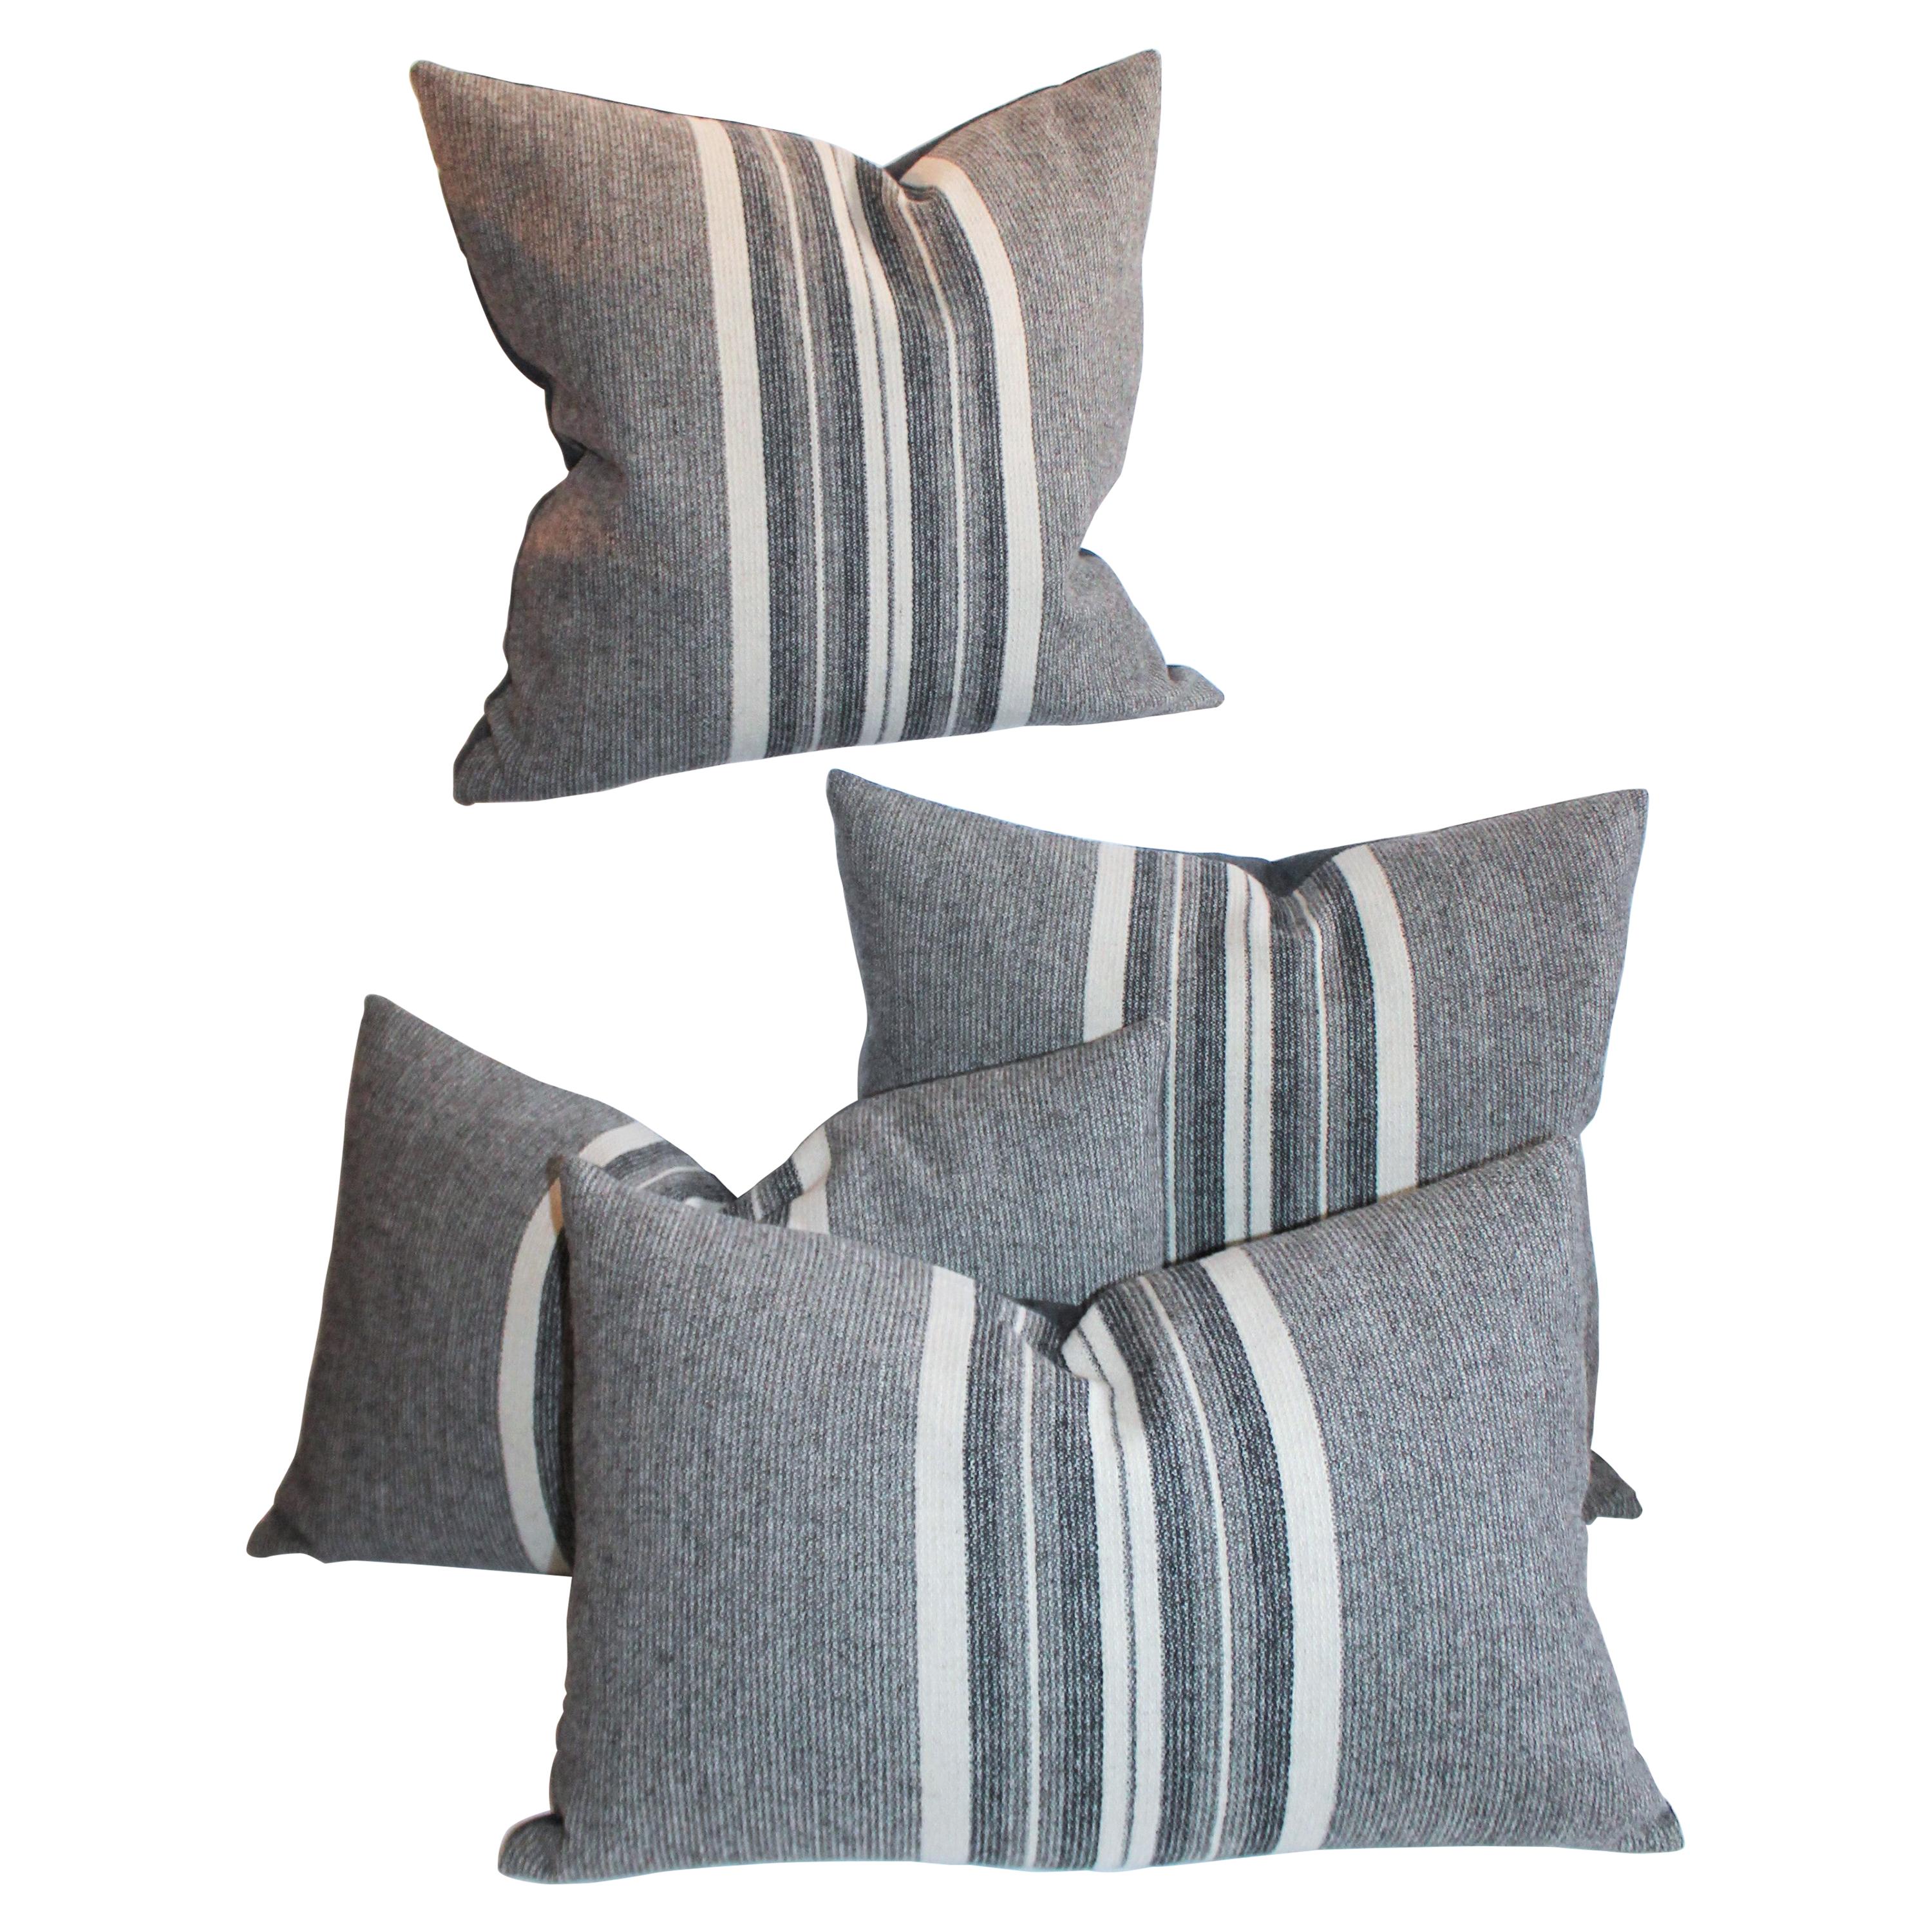 Collection of Grey Flannel Handwoven Stripped Pillows, 4 Pieces For Sale